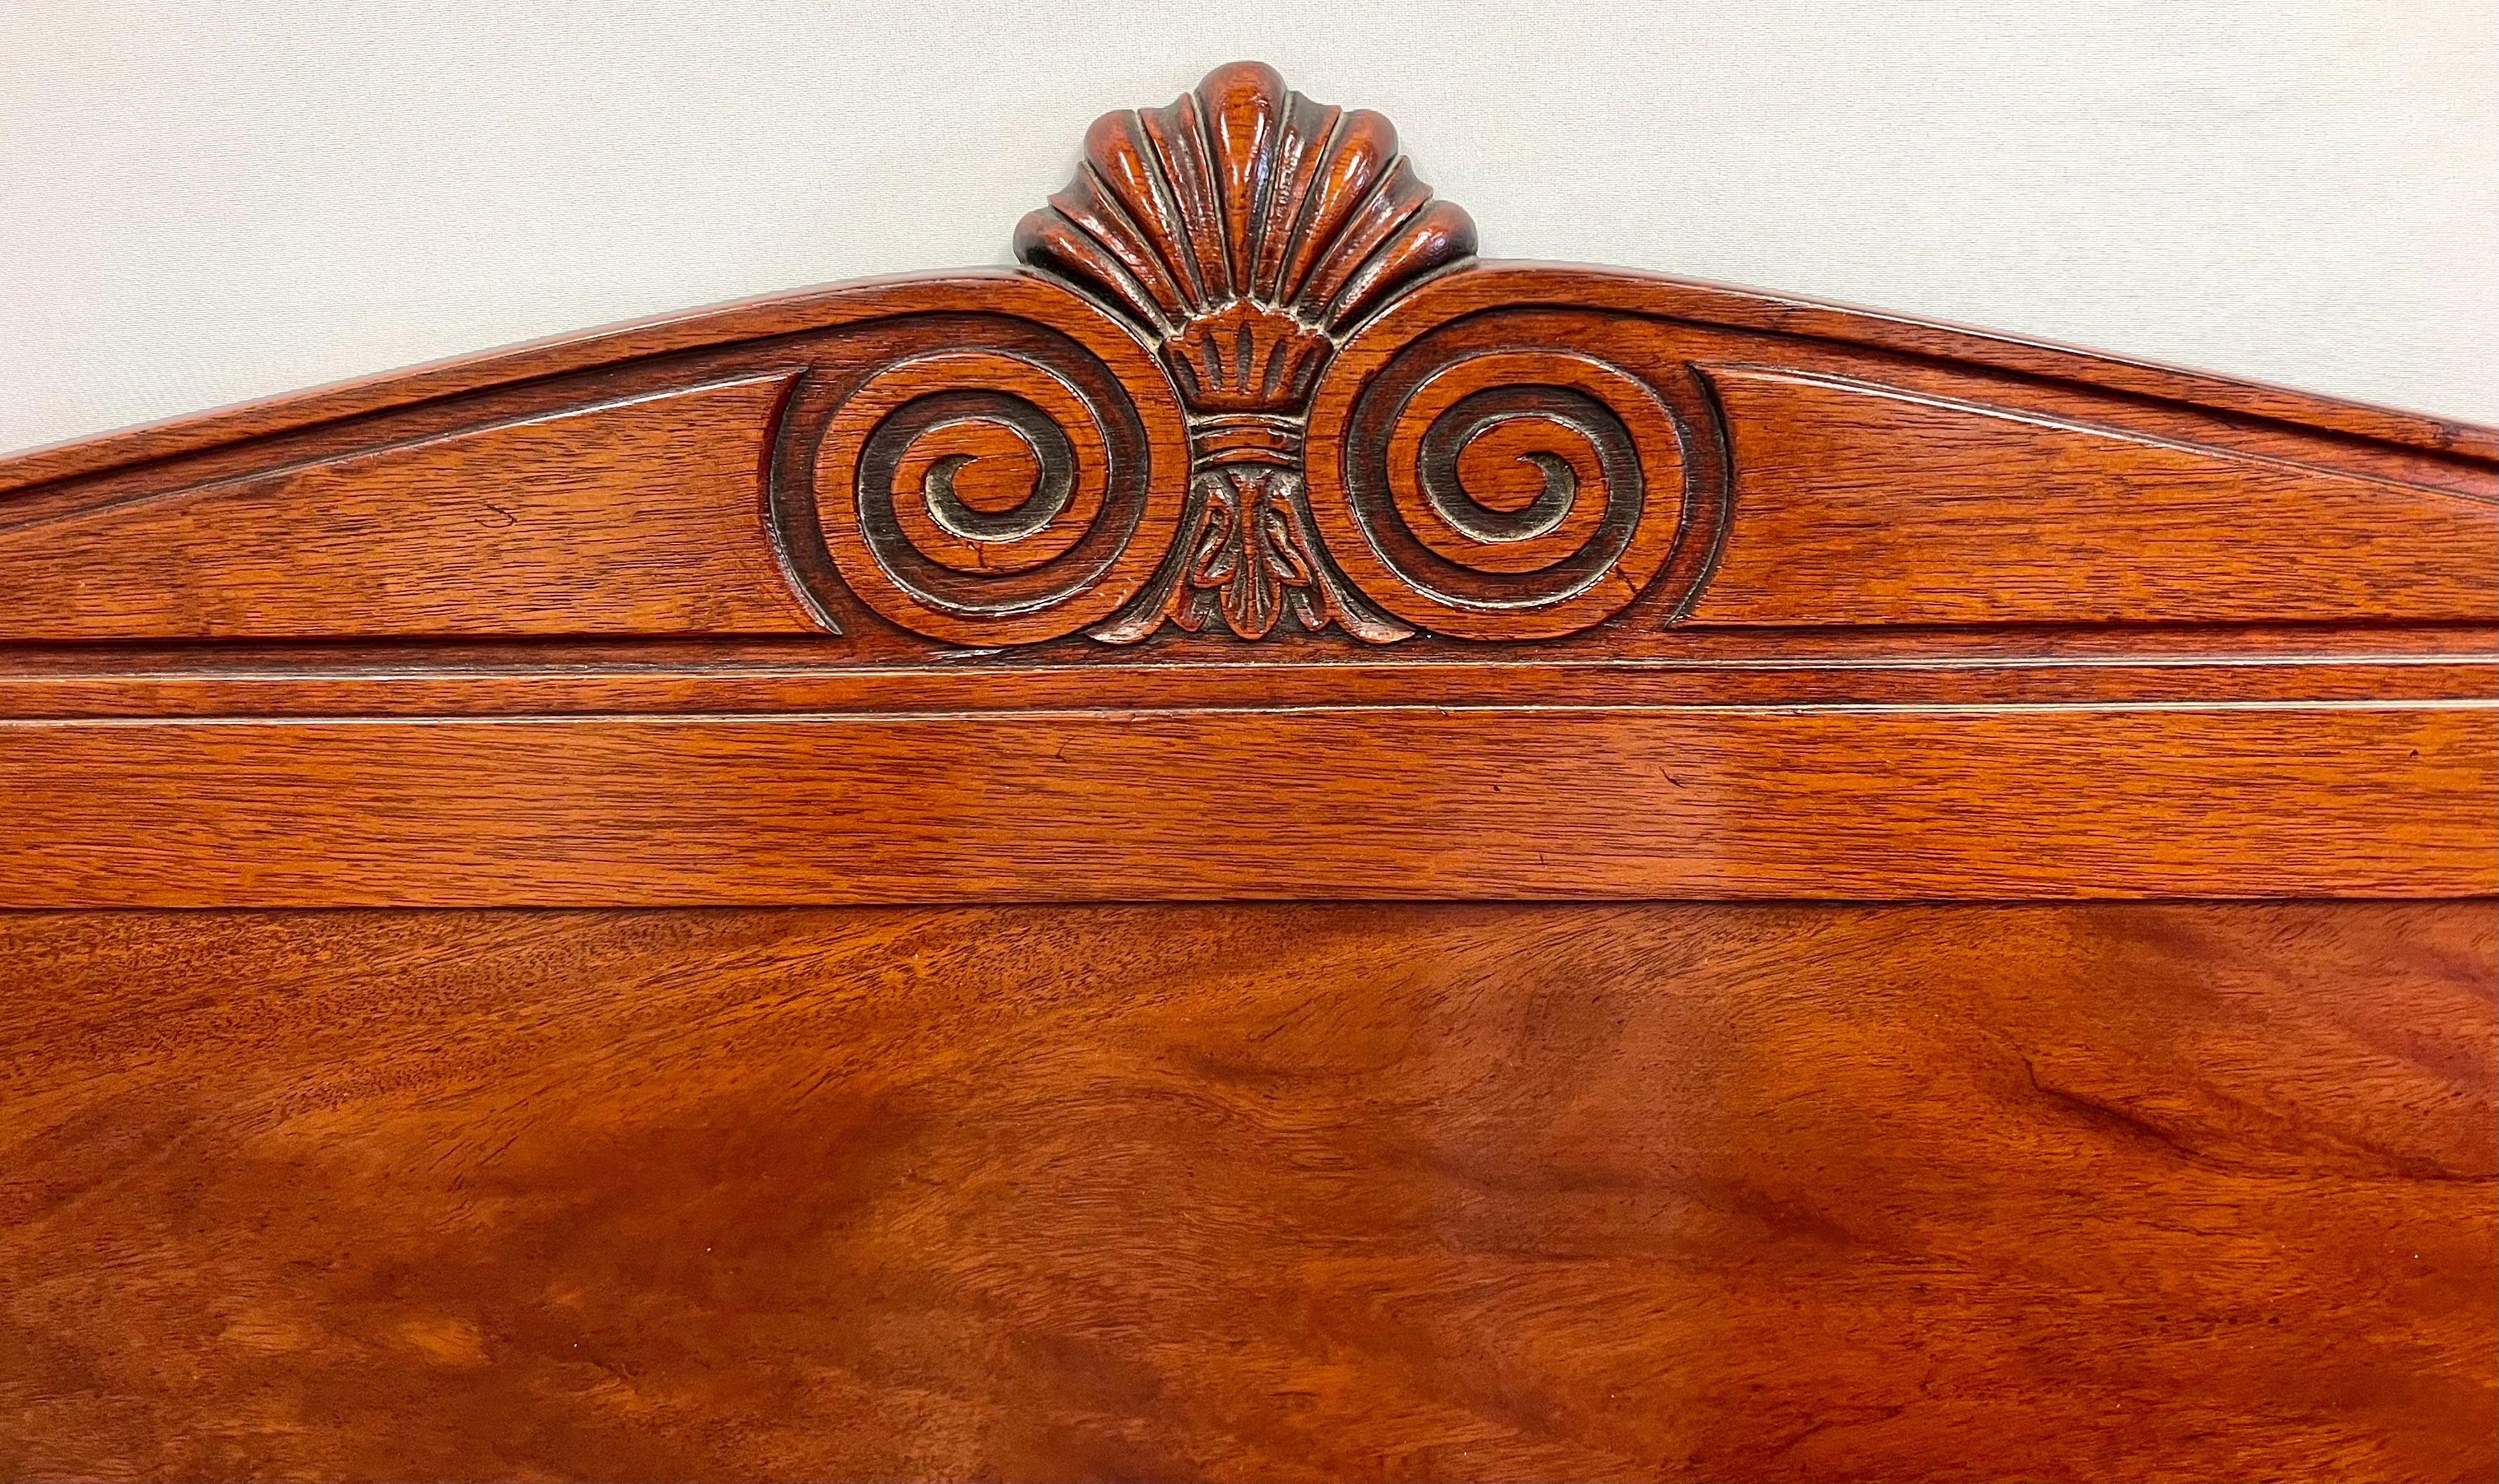 Federal Pair of Coveted Beacon Hill Furniture Collection Mahogany Twin Headboards